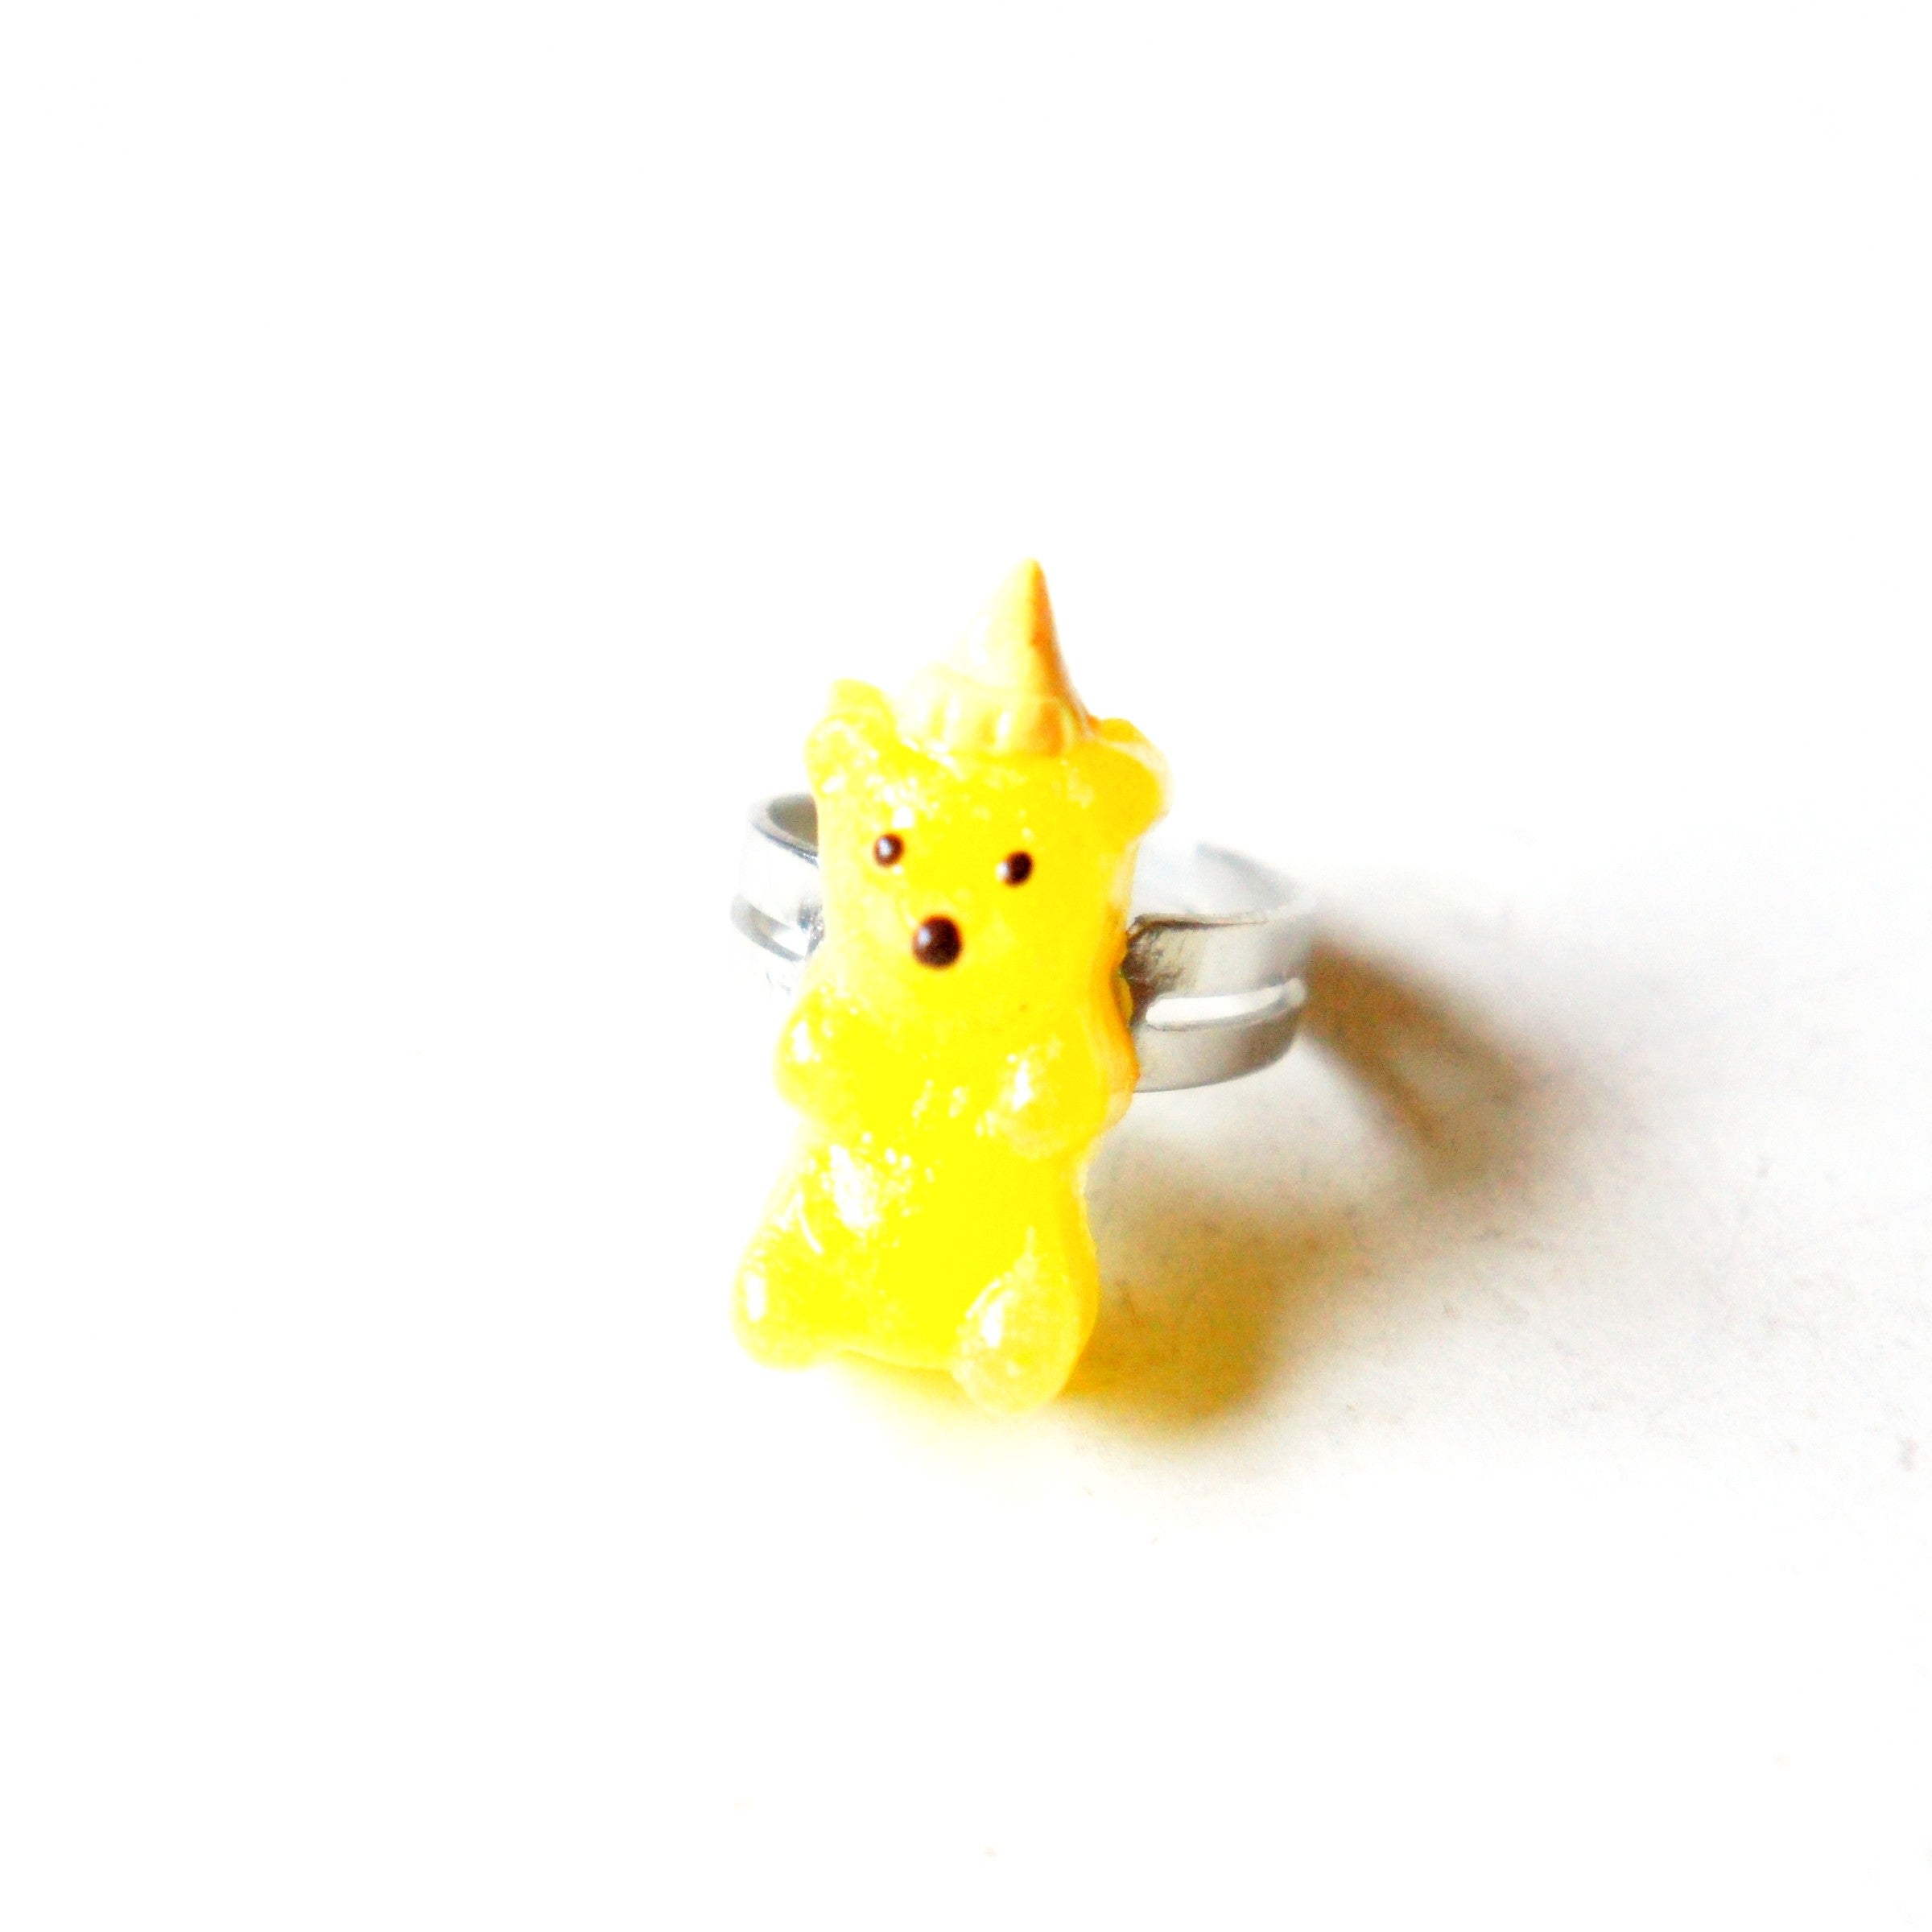 Honey Bear Ring - Jillicious charms and accessories